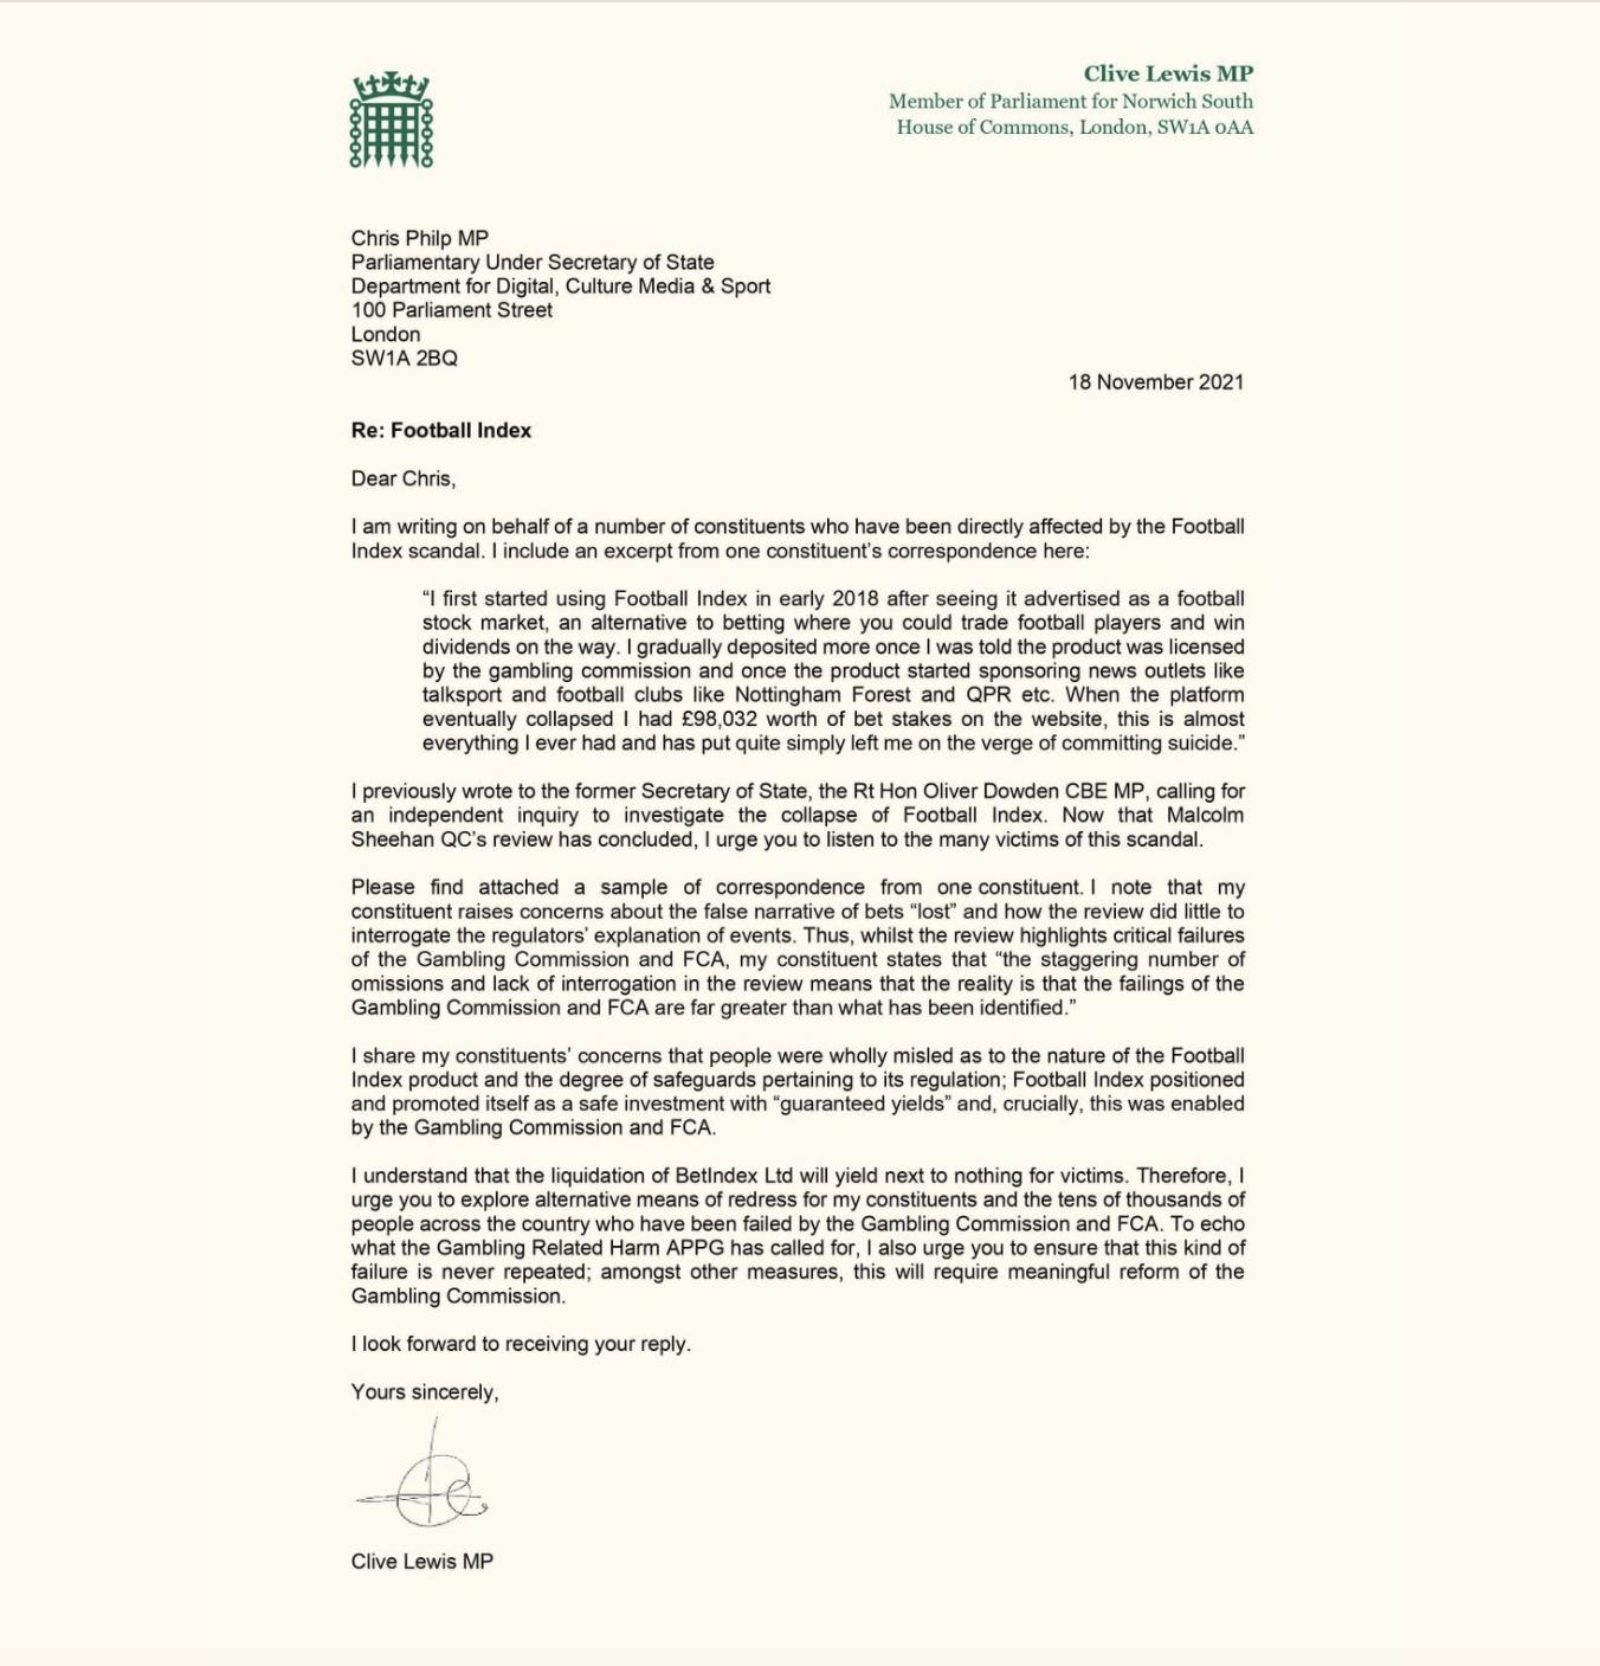 Image shows a letter on Parliamentary Paper from Clive to Chris Philip